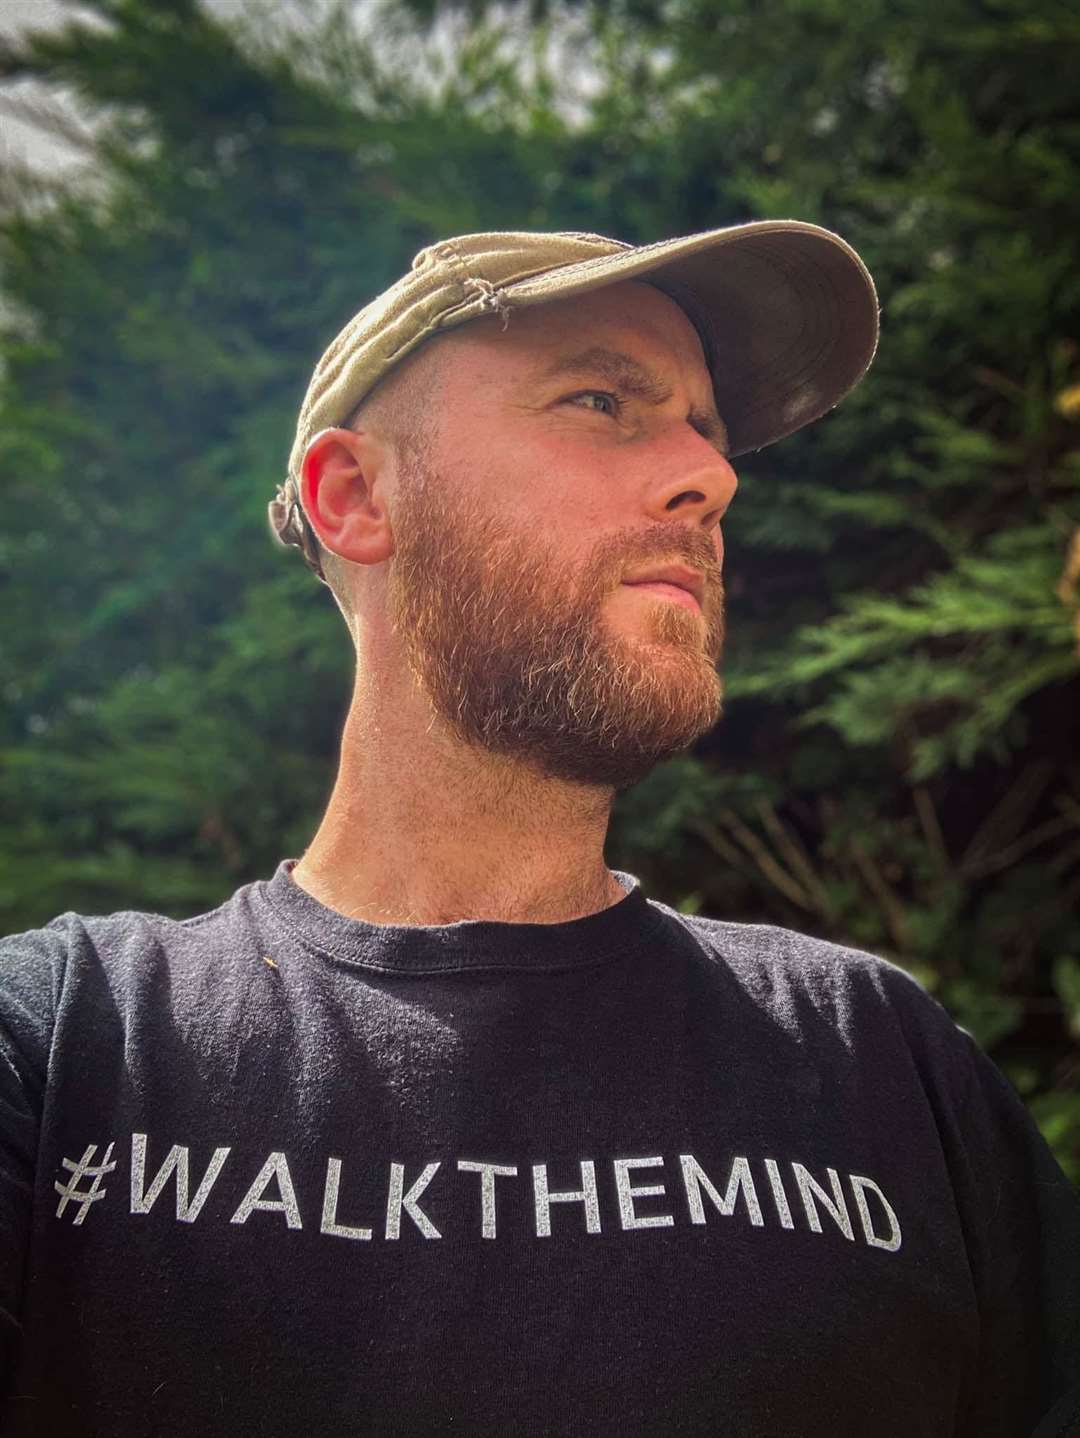 Oliver Bowers' #WalktheMind campaign is followed by 30,000 people from more than 120 countries